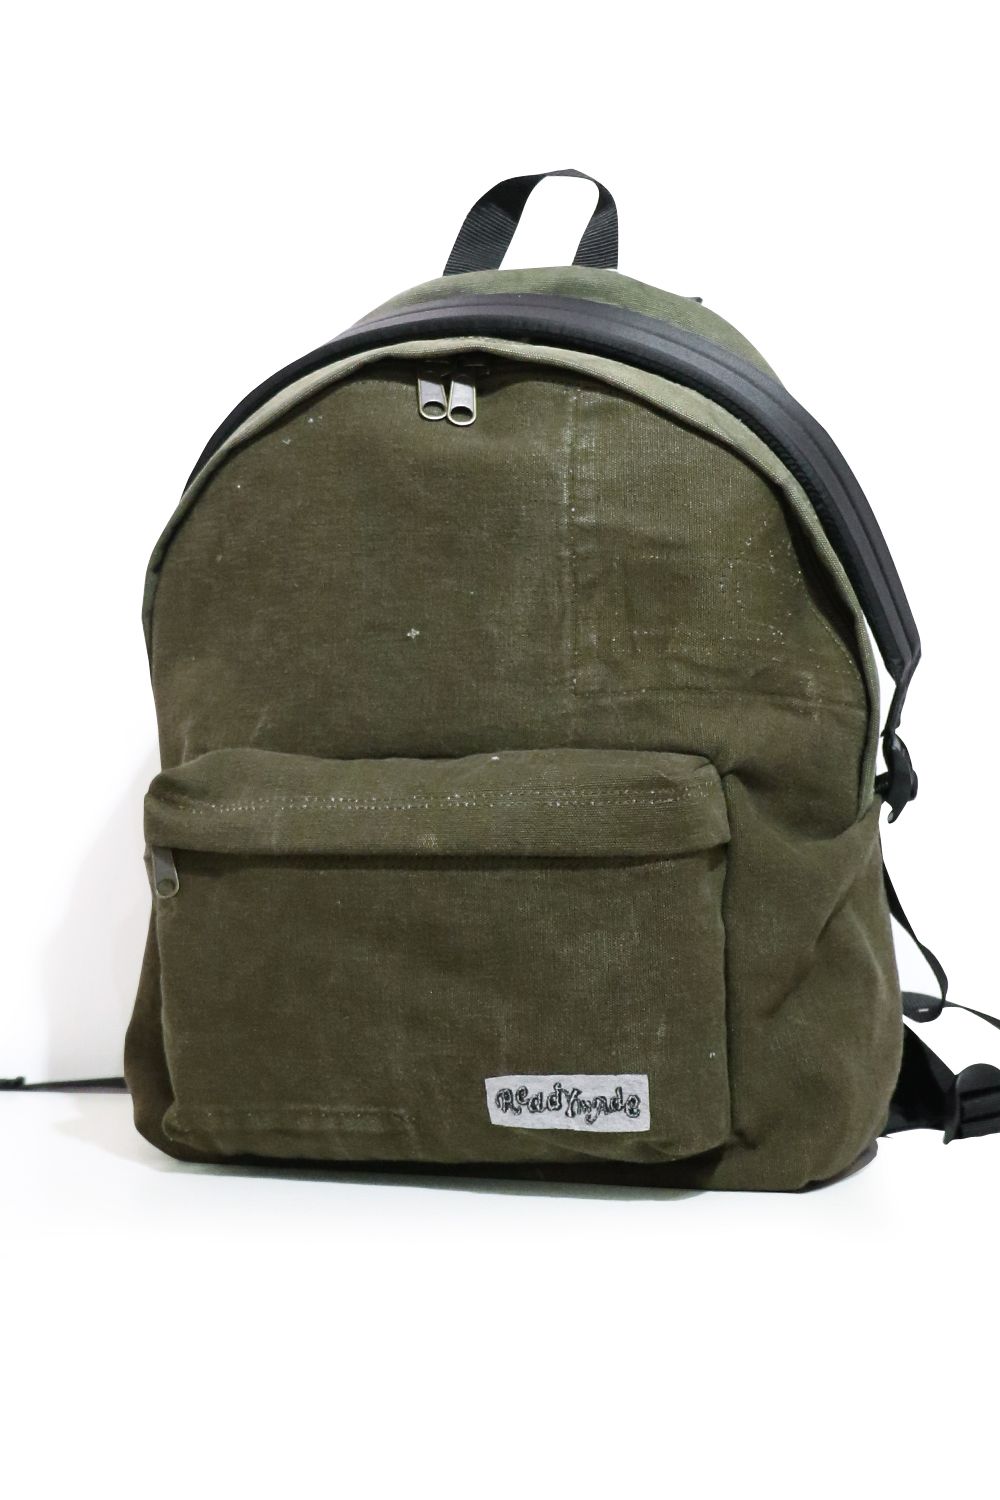 READYMADE - BACK PACK / バックパック | laid-back